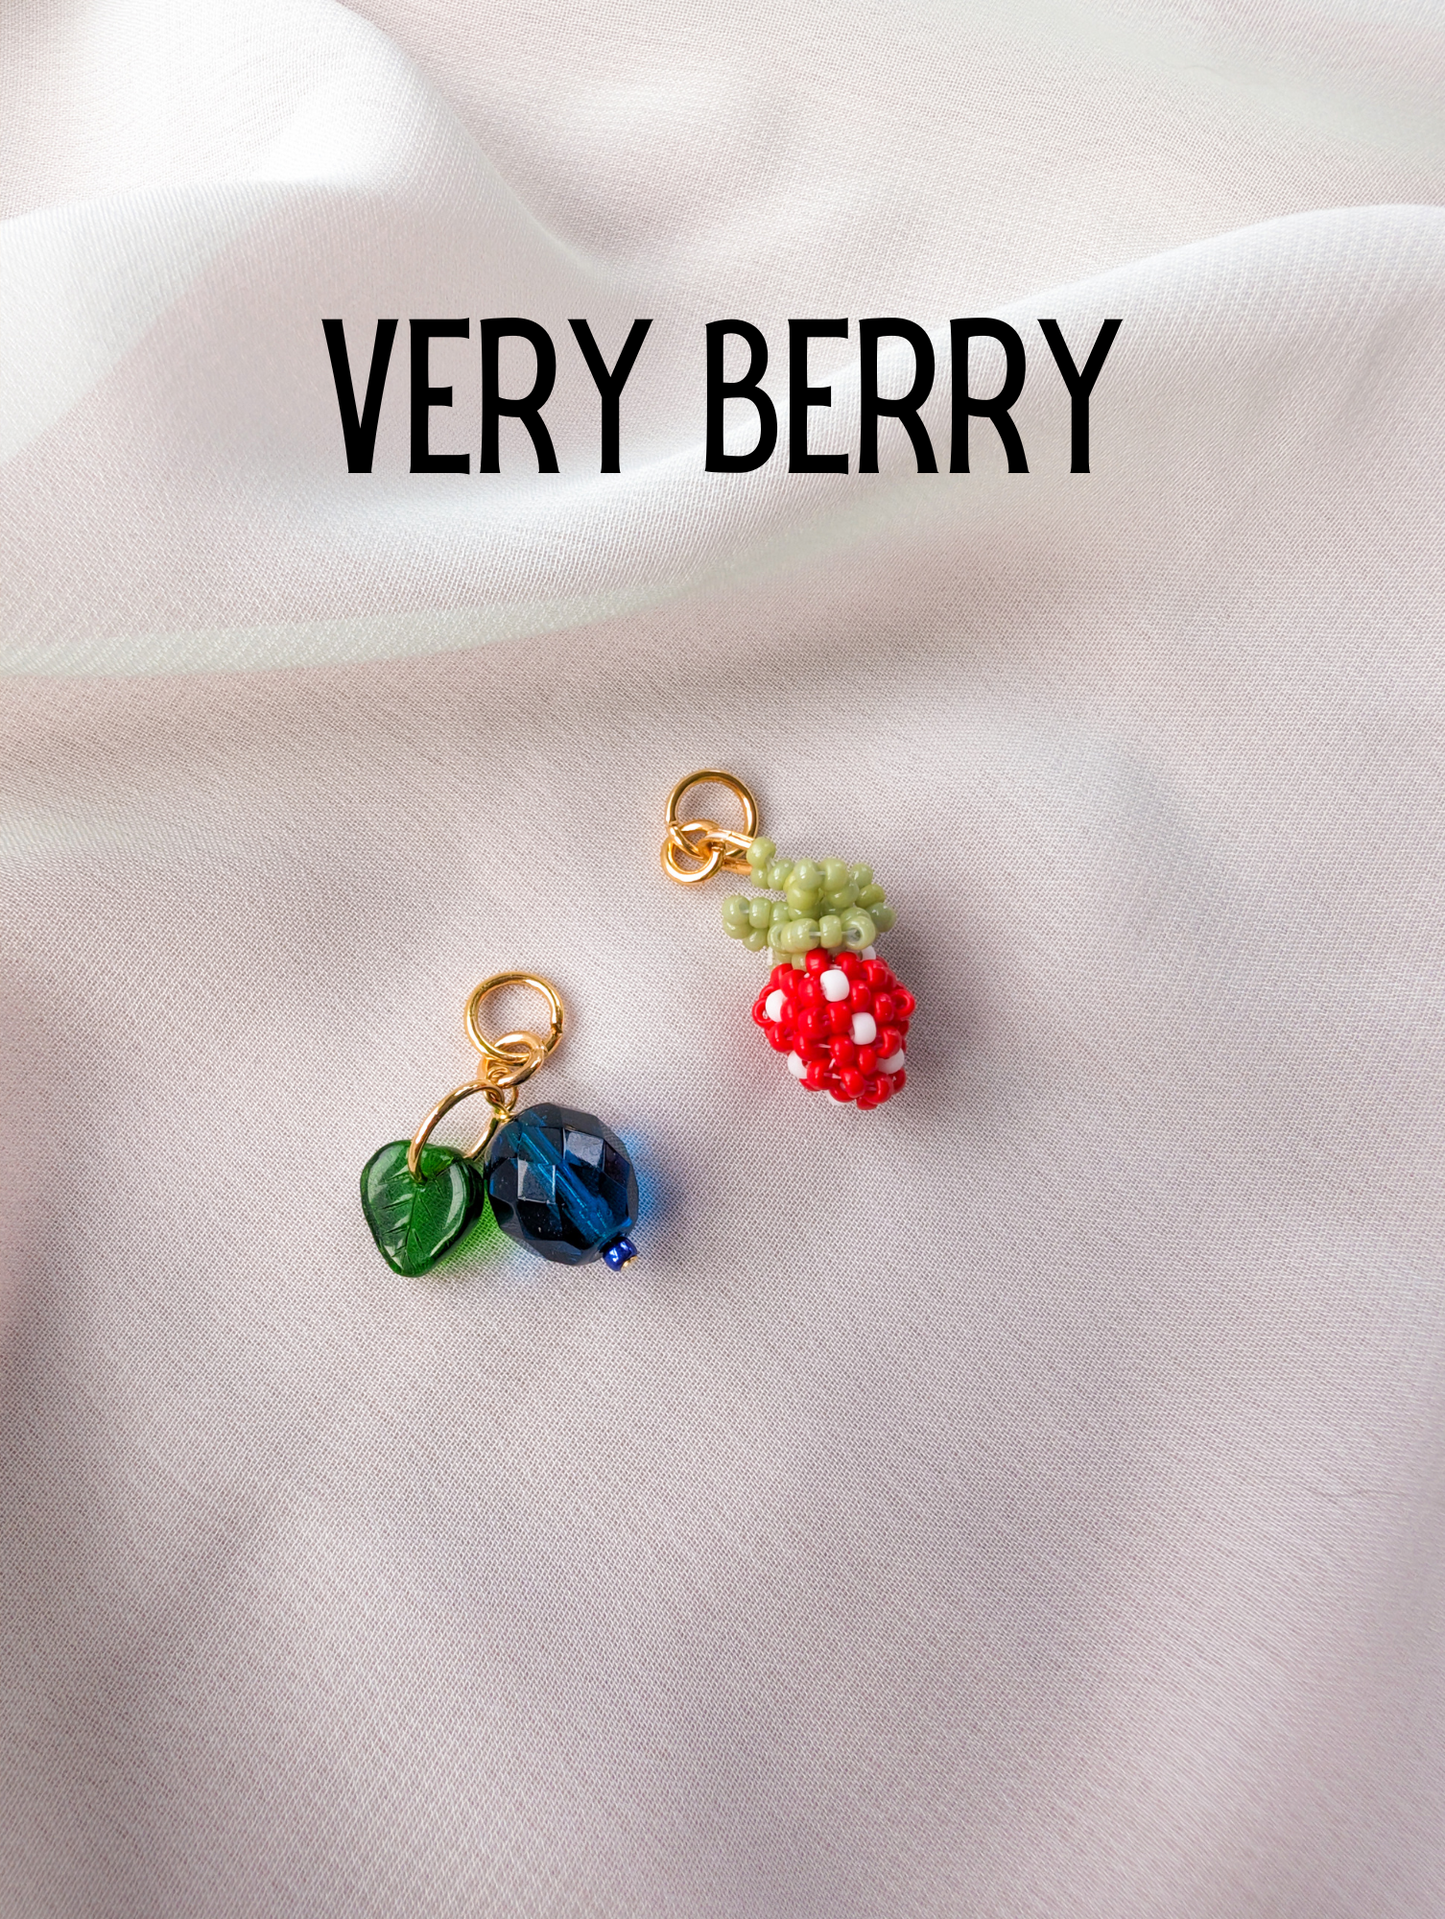 Very Berry - Strawberry & Blueberry - SINGLE CHARMS